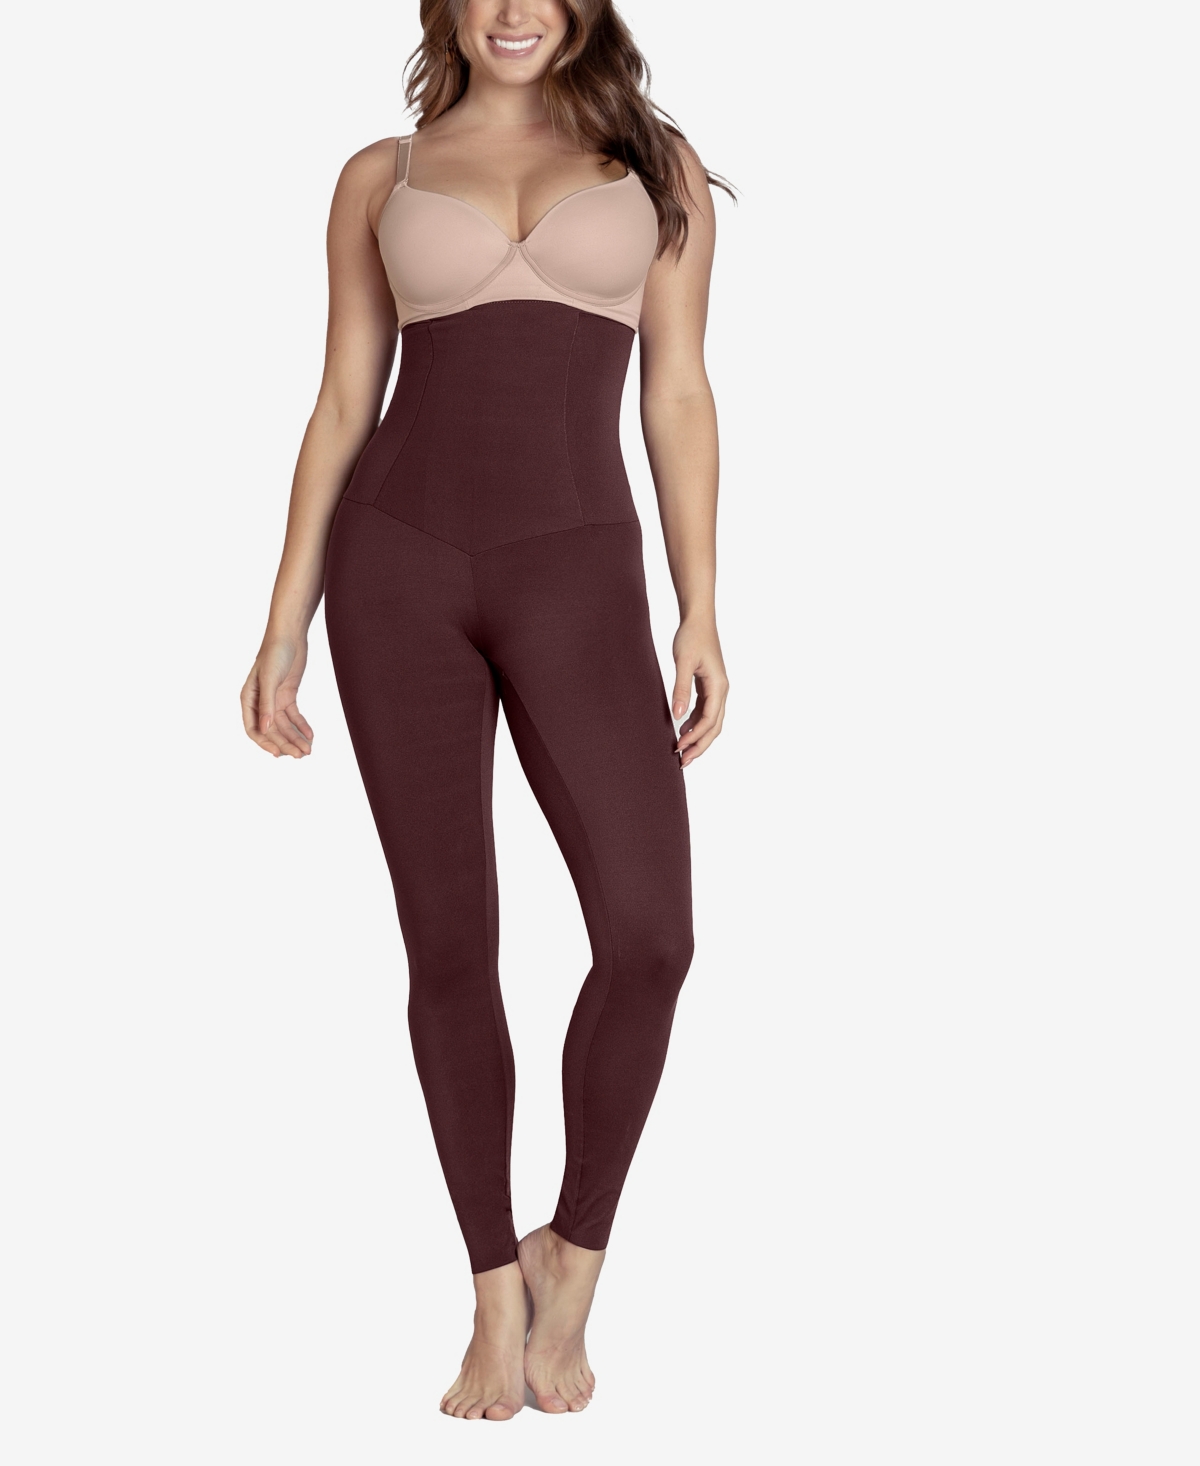 Leonisa Women's Extra High Waisted Firm Compression Legging in Dark Wine